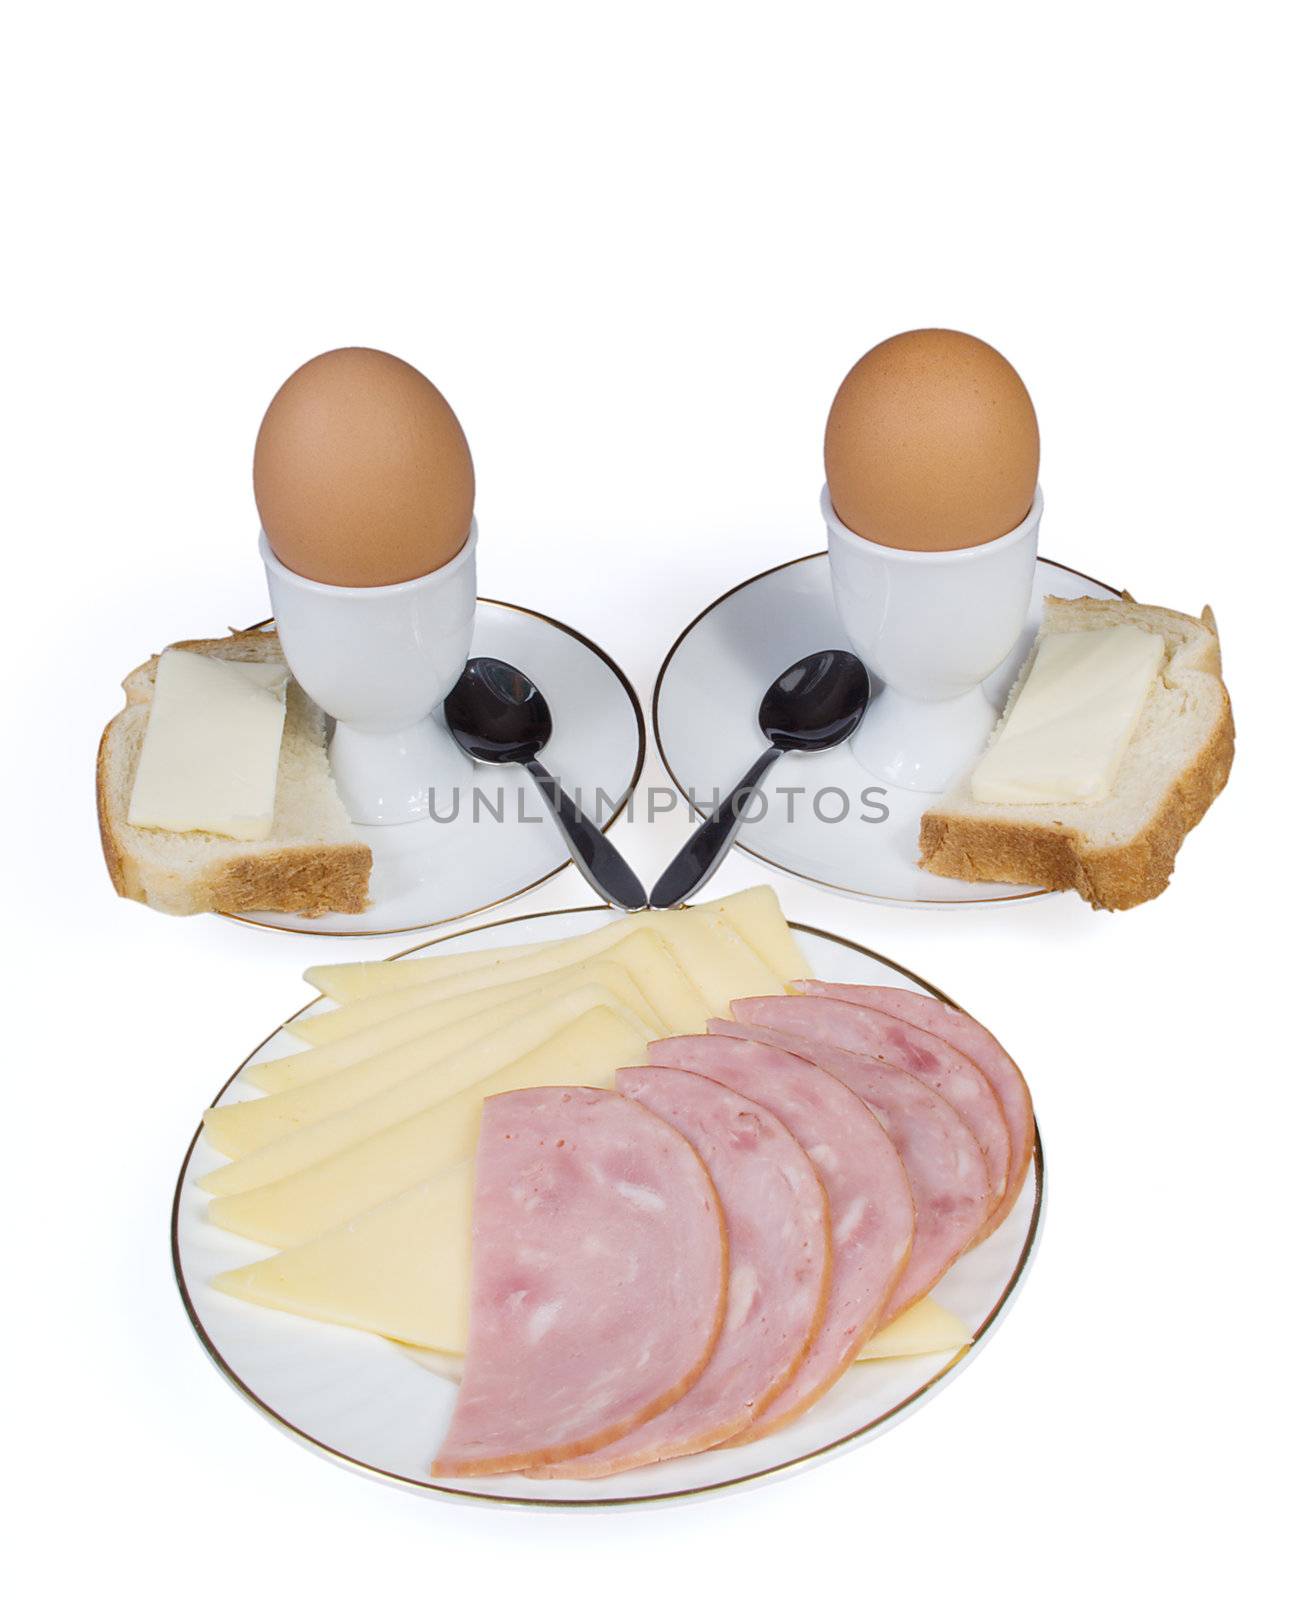 Eggs, cheese and sausage on a white background